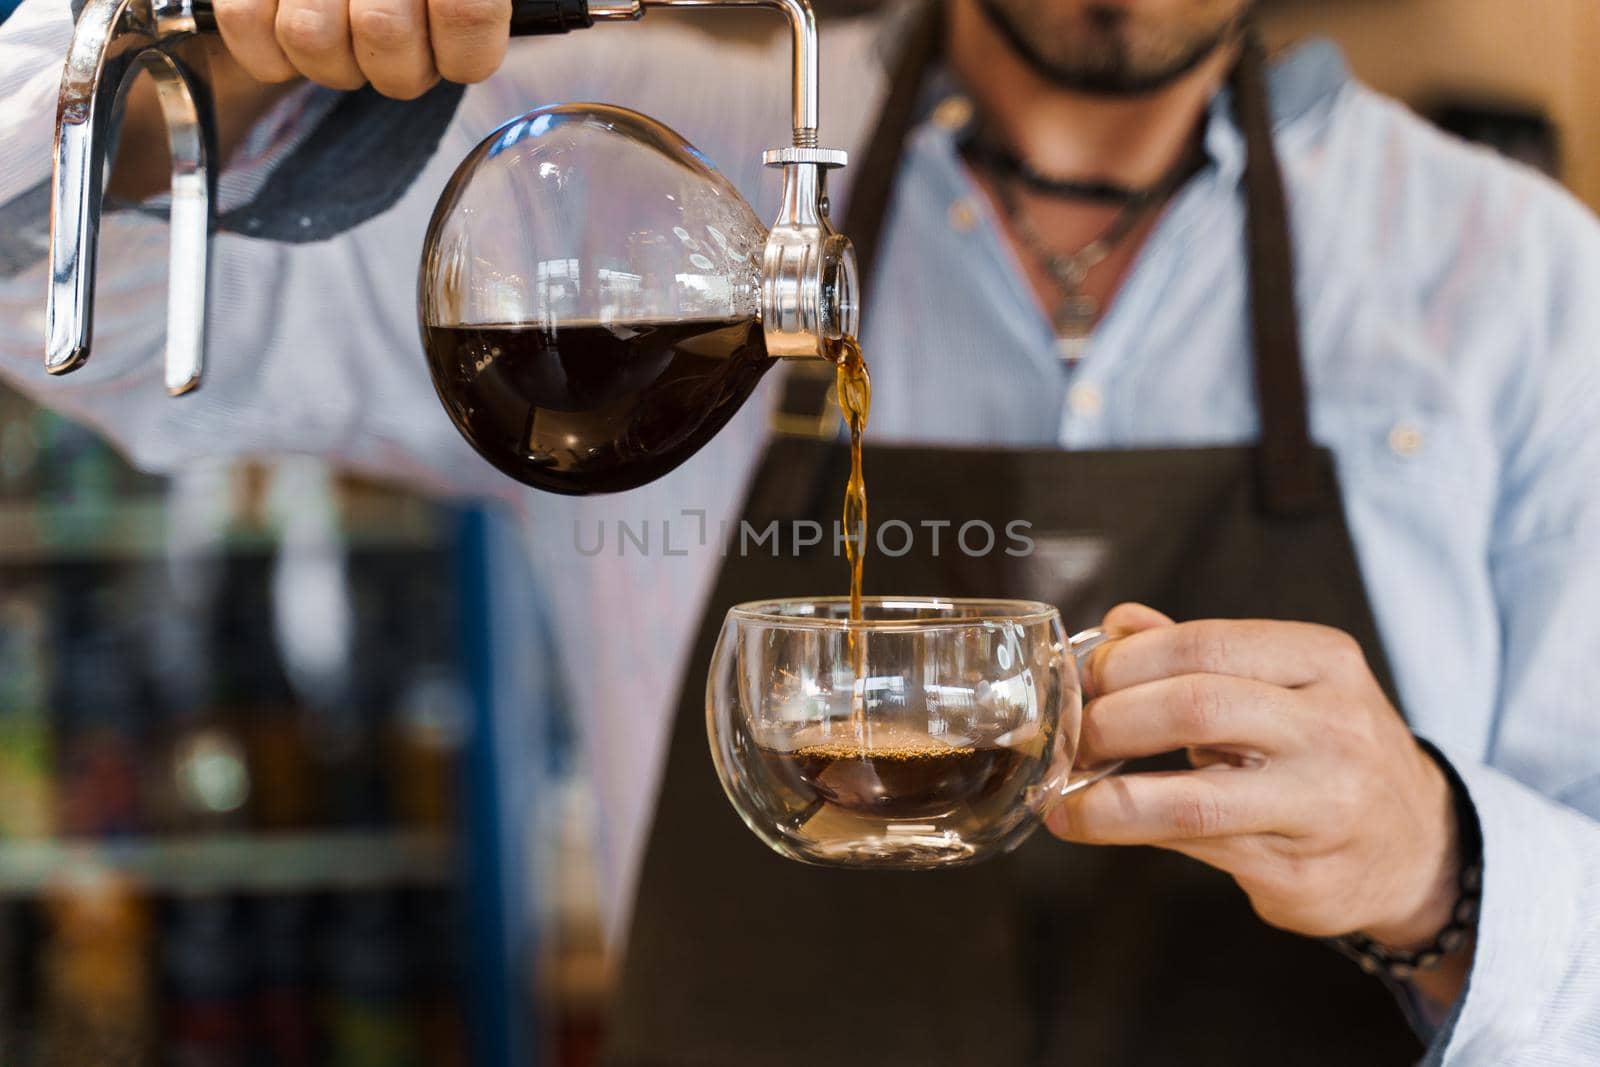 Close-up Syphon alternative method of making coffee. Barista pours hot coffee in syphon device for customers. Coffee brewing in cafe